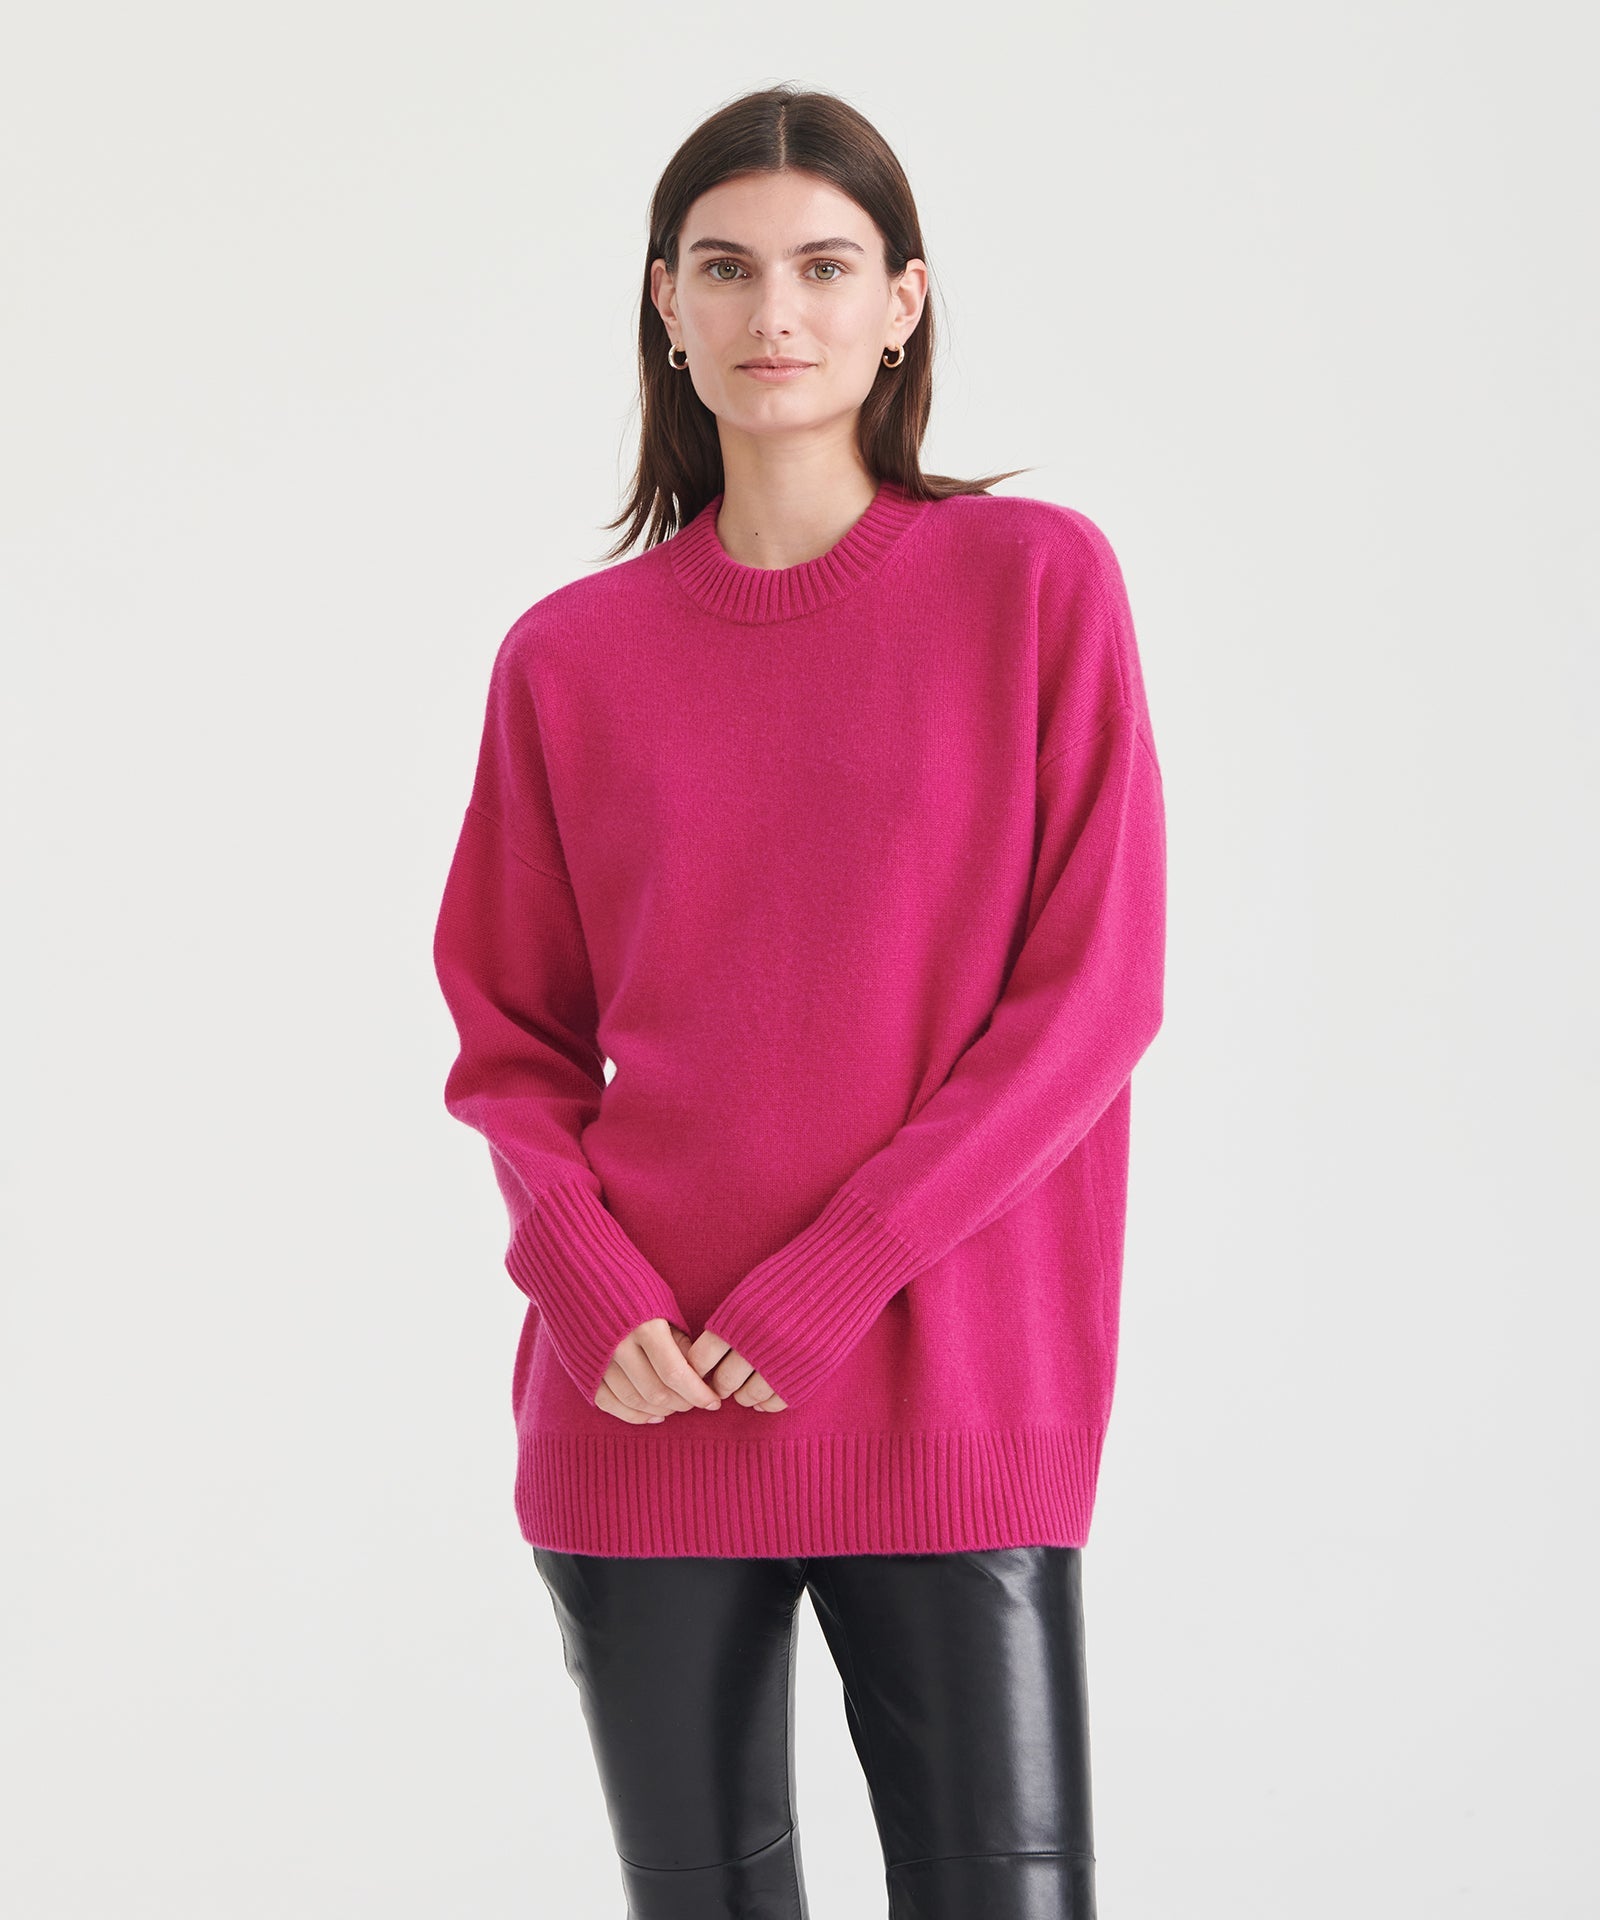 Cashmere > Oversized extremely soft 100% cashmere sweater Buy from e-shop